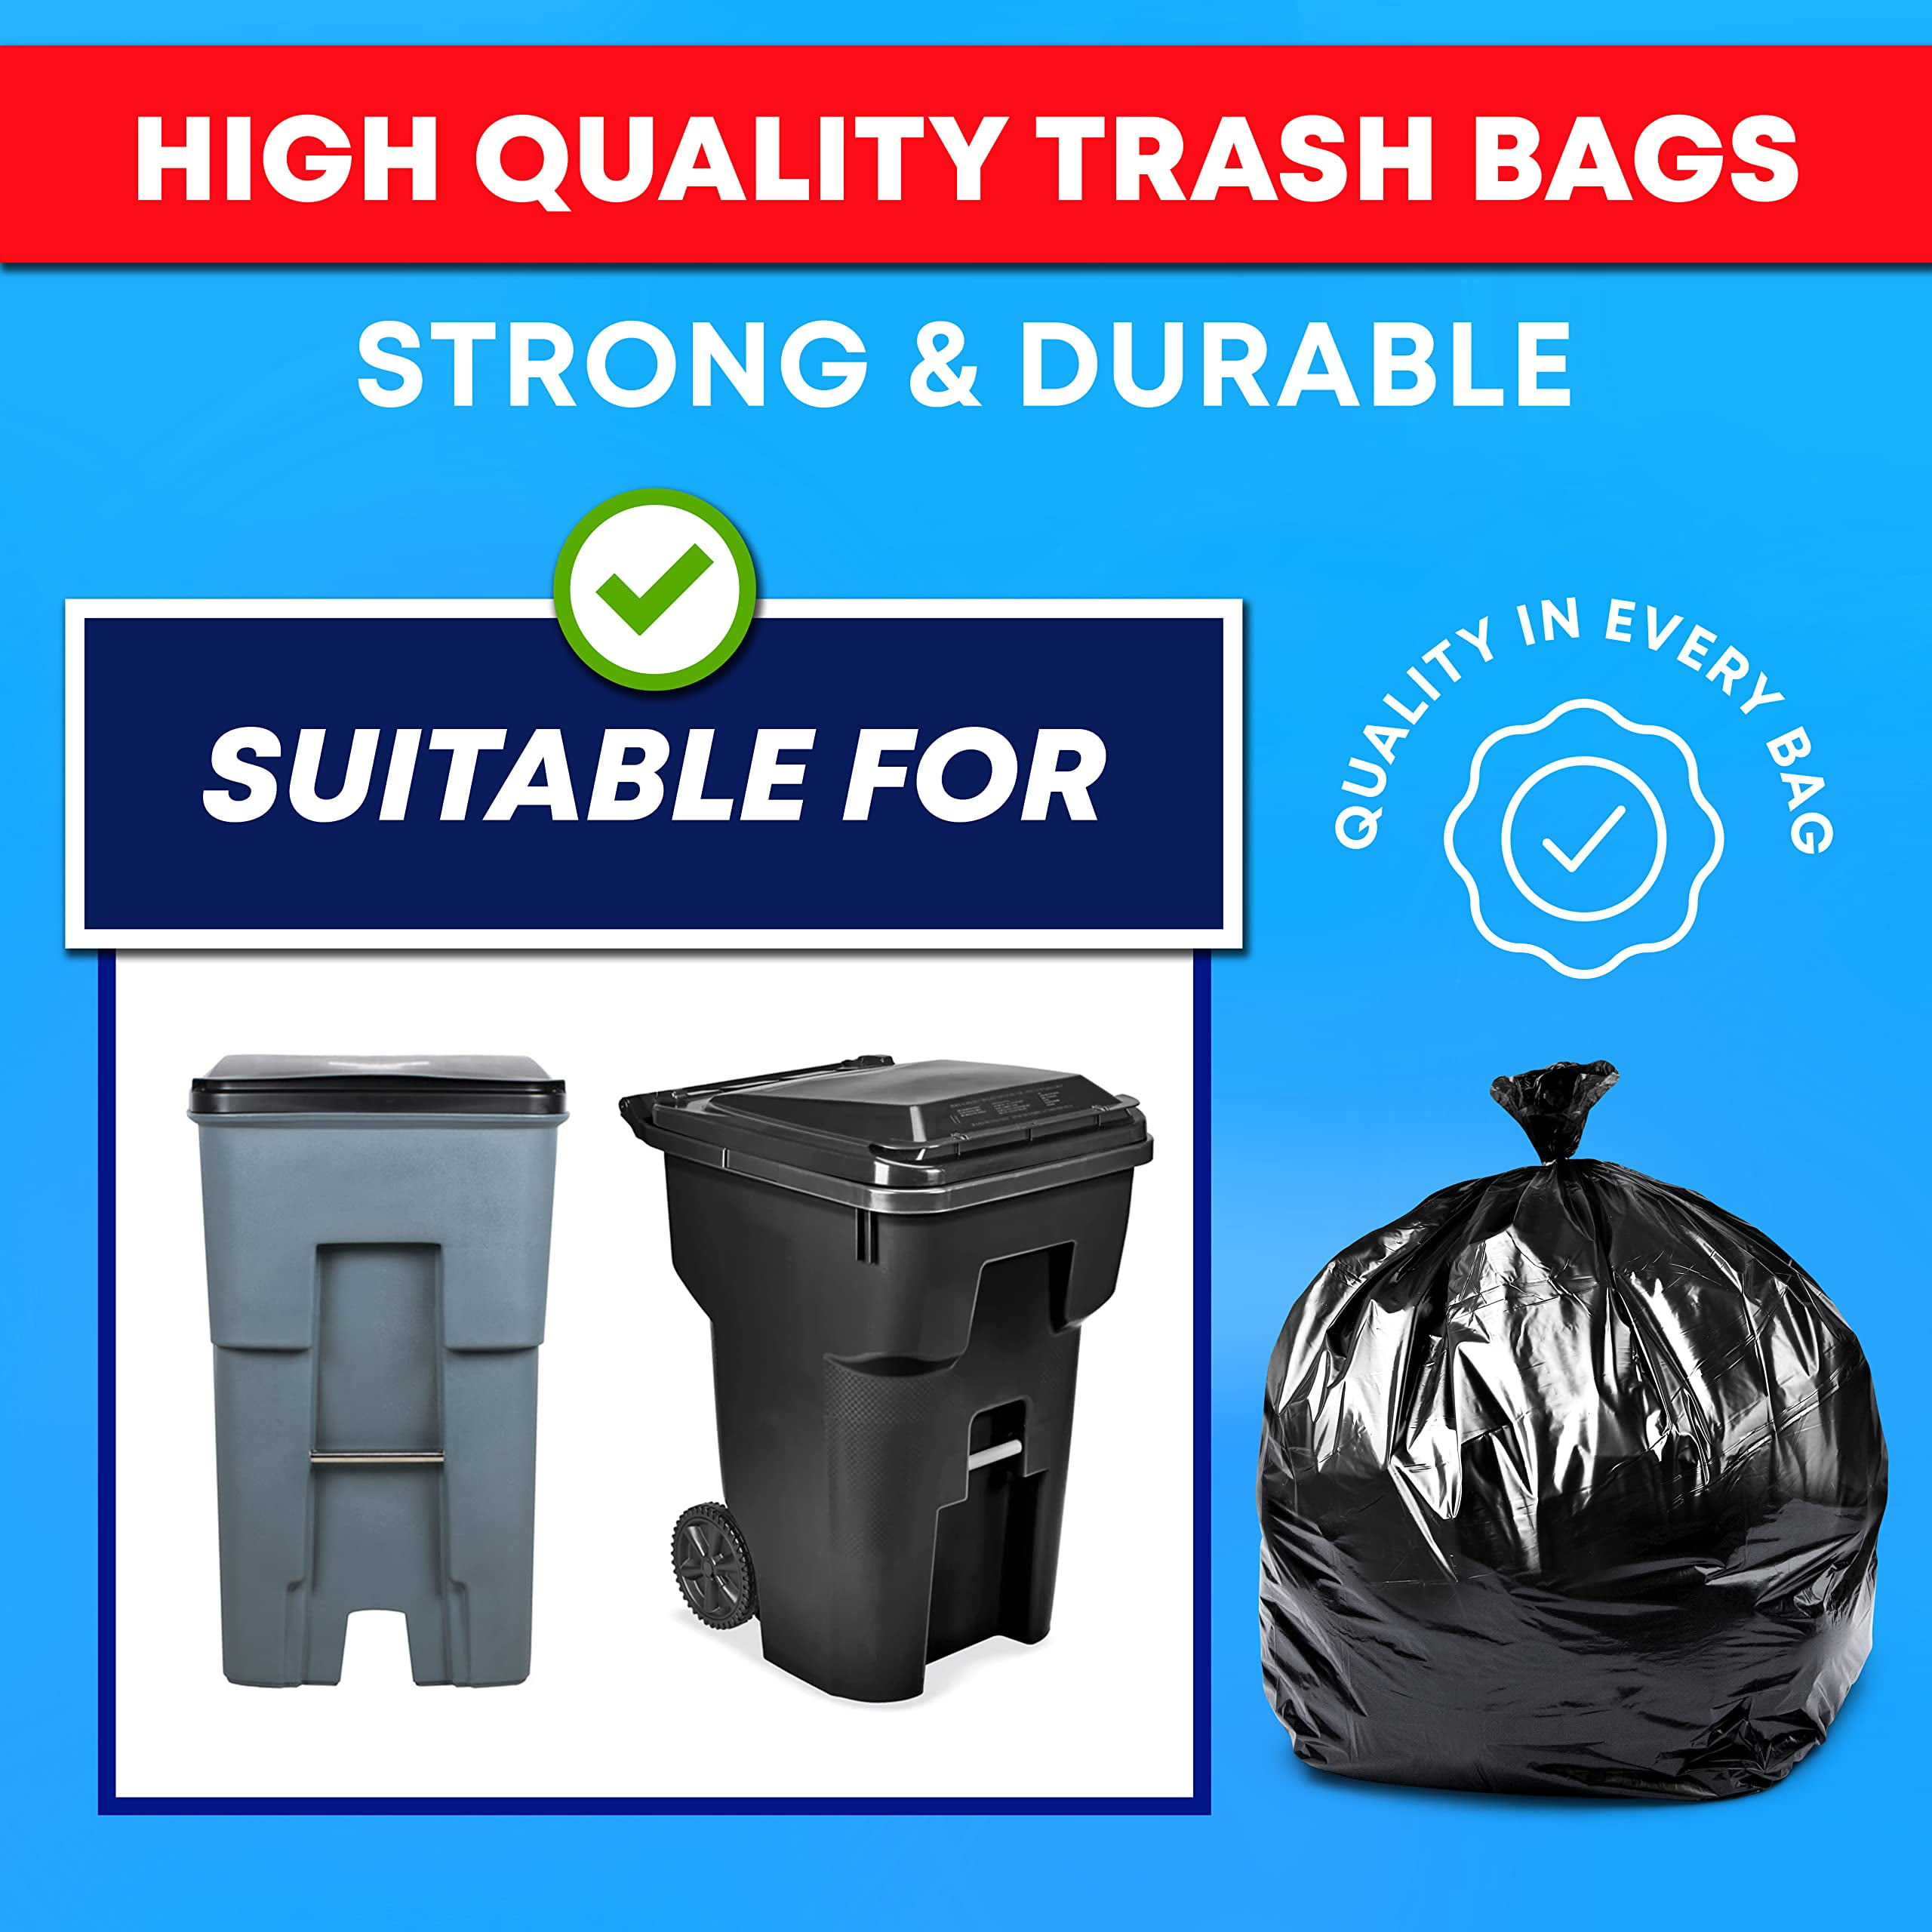 Eagrye 2.5 gallon Trash Can Liners, Black Trash Bags, 170 Counts